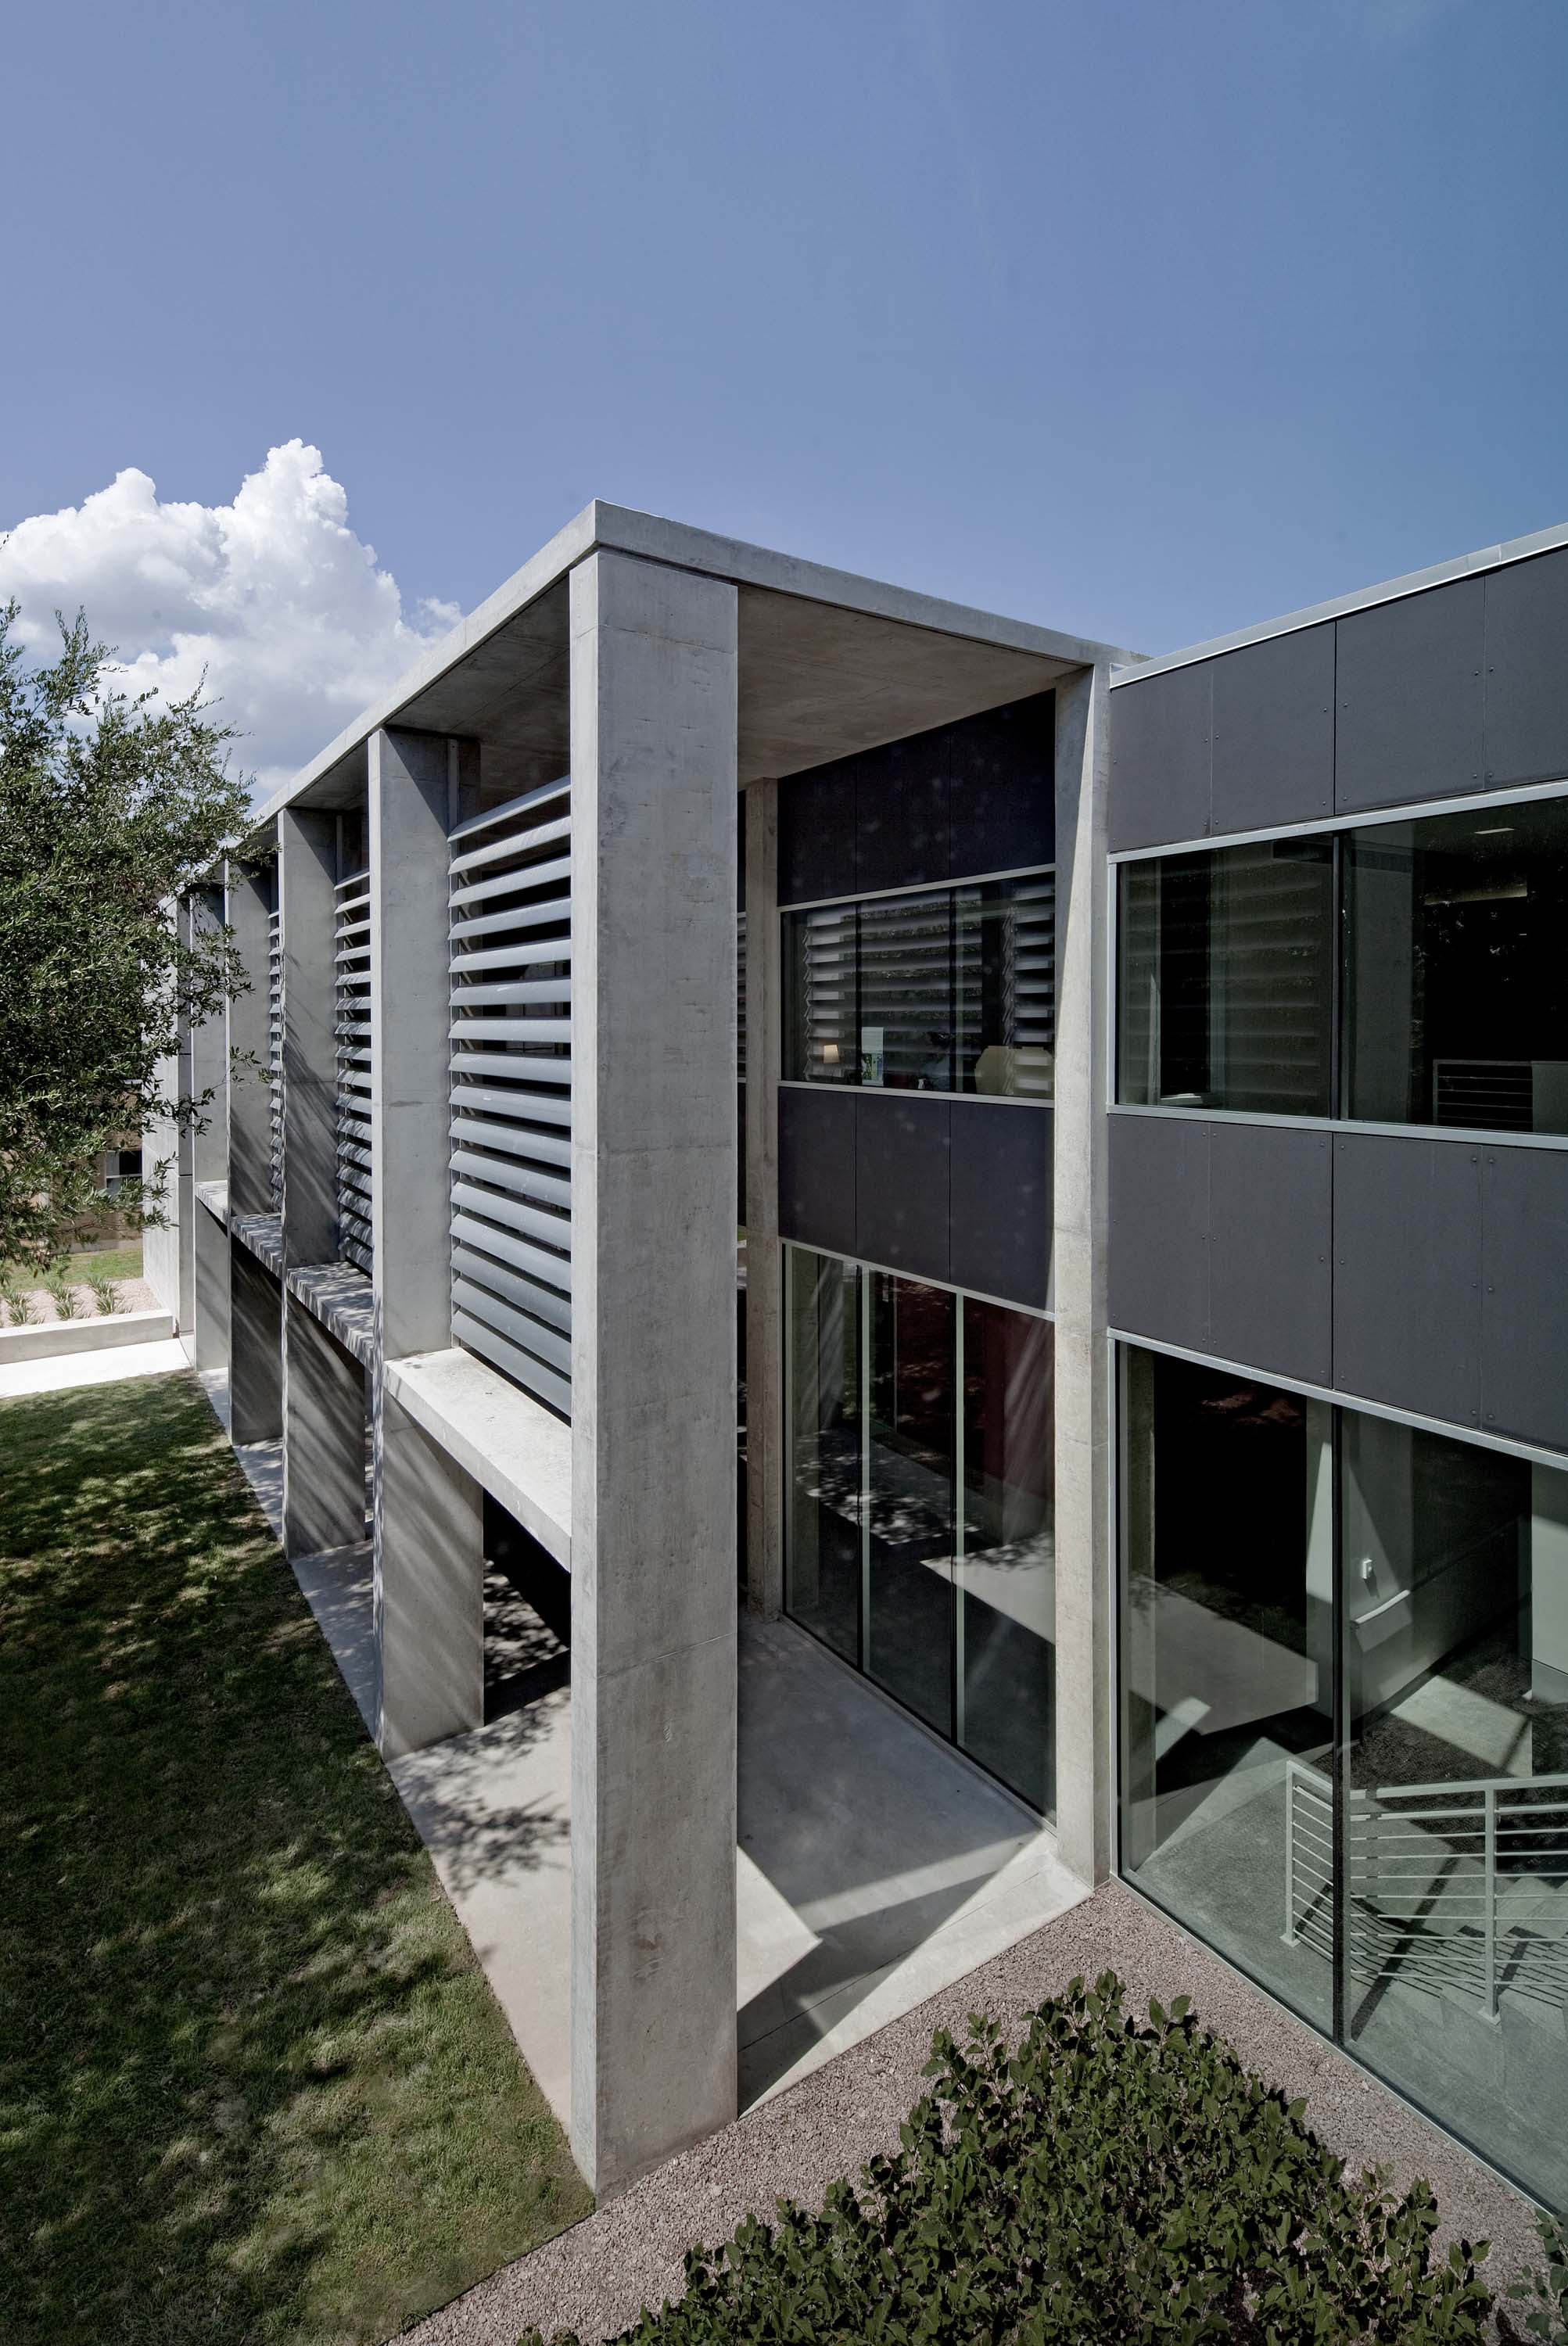 View of exterior of Doyle Hall by Specht Novak Architects to showcase the wall panels beyond the windows. Shot by Taggart Sorensen.